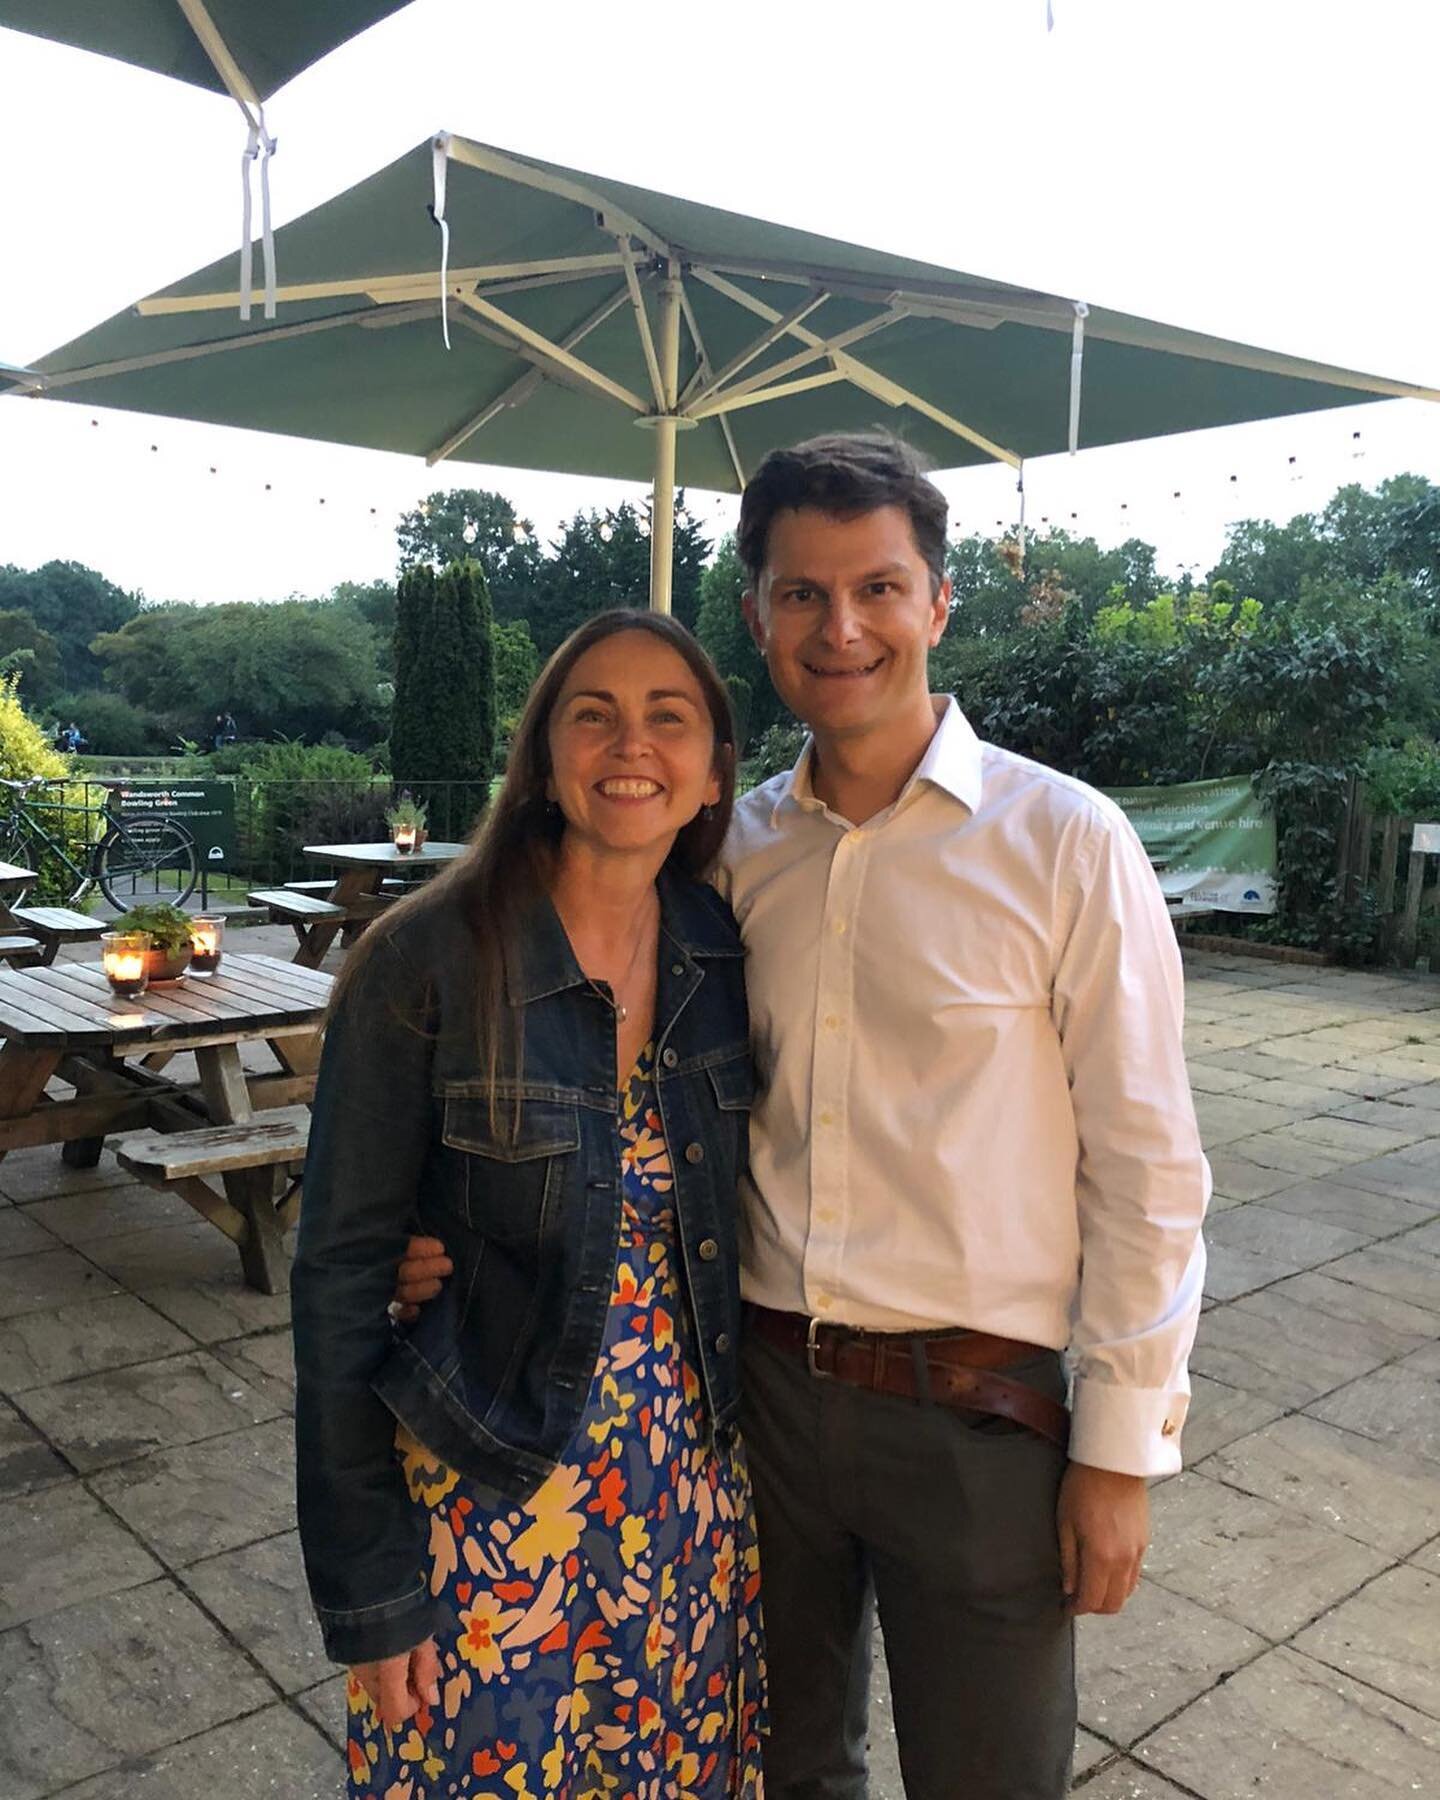 Meet Charlie &amp; Fran - the @roots_berries founders! ☕️🍦

Passionate about doing good in the community and lovers of green spaces (they have two children and little dog called &lsquo;Maggie&rsquo;), Charlie &amp; Fran were inspired to open their f